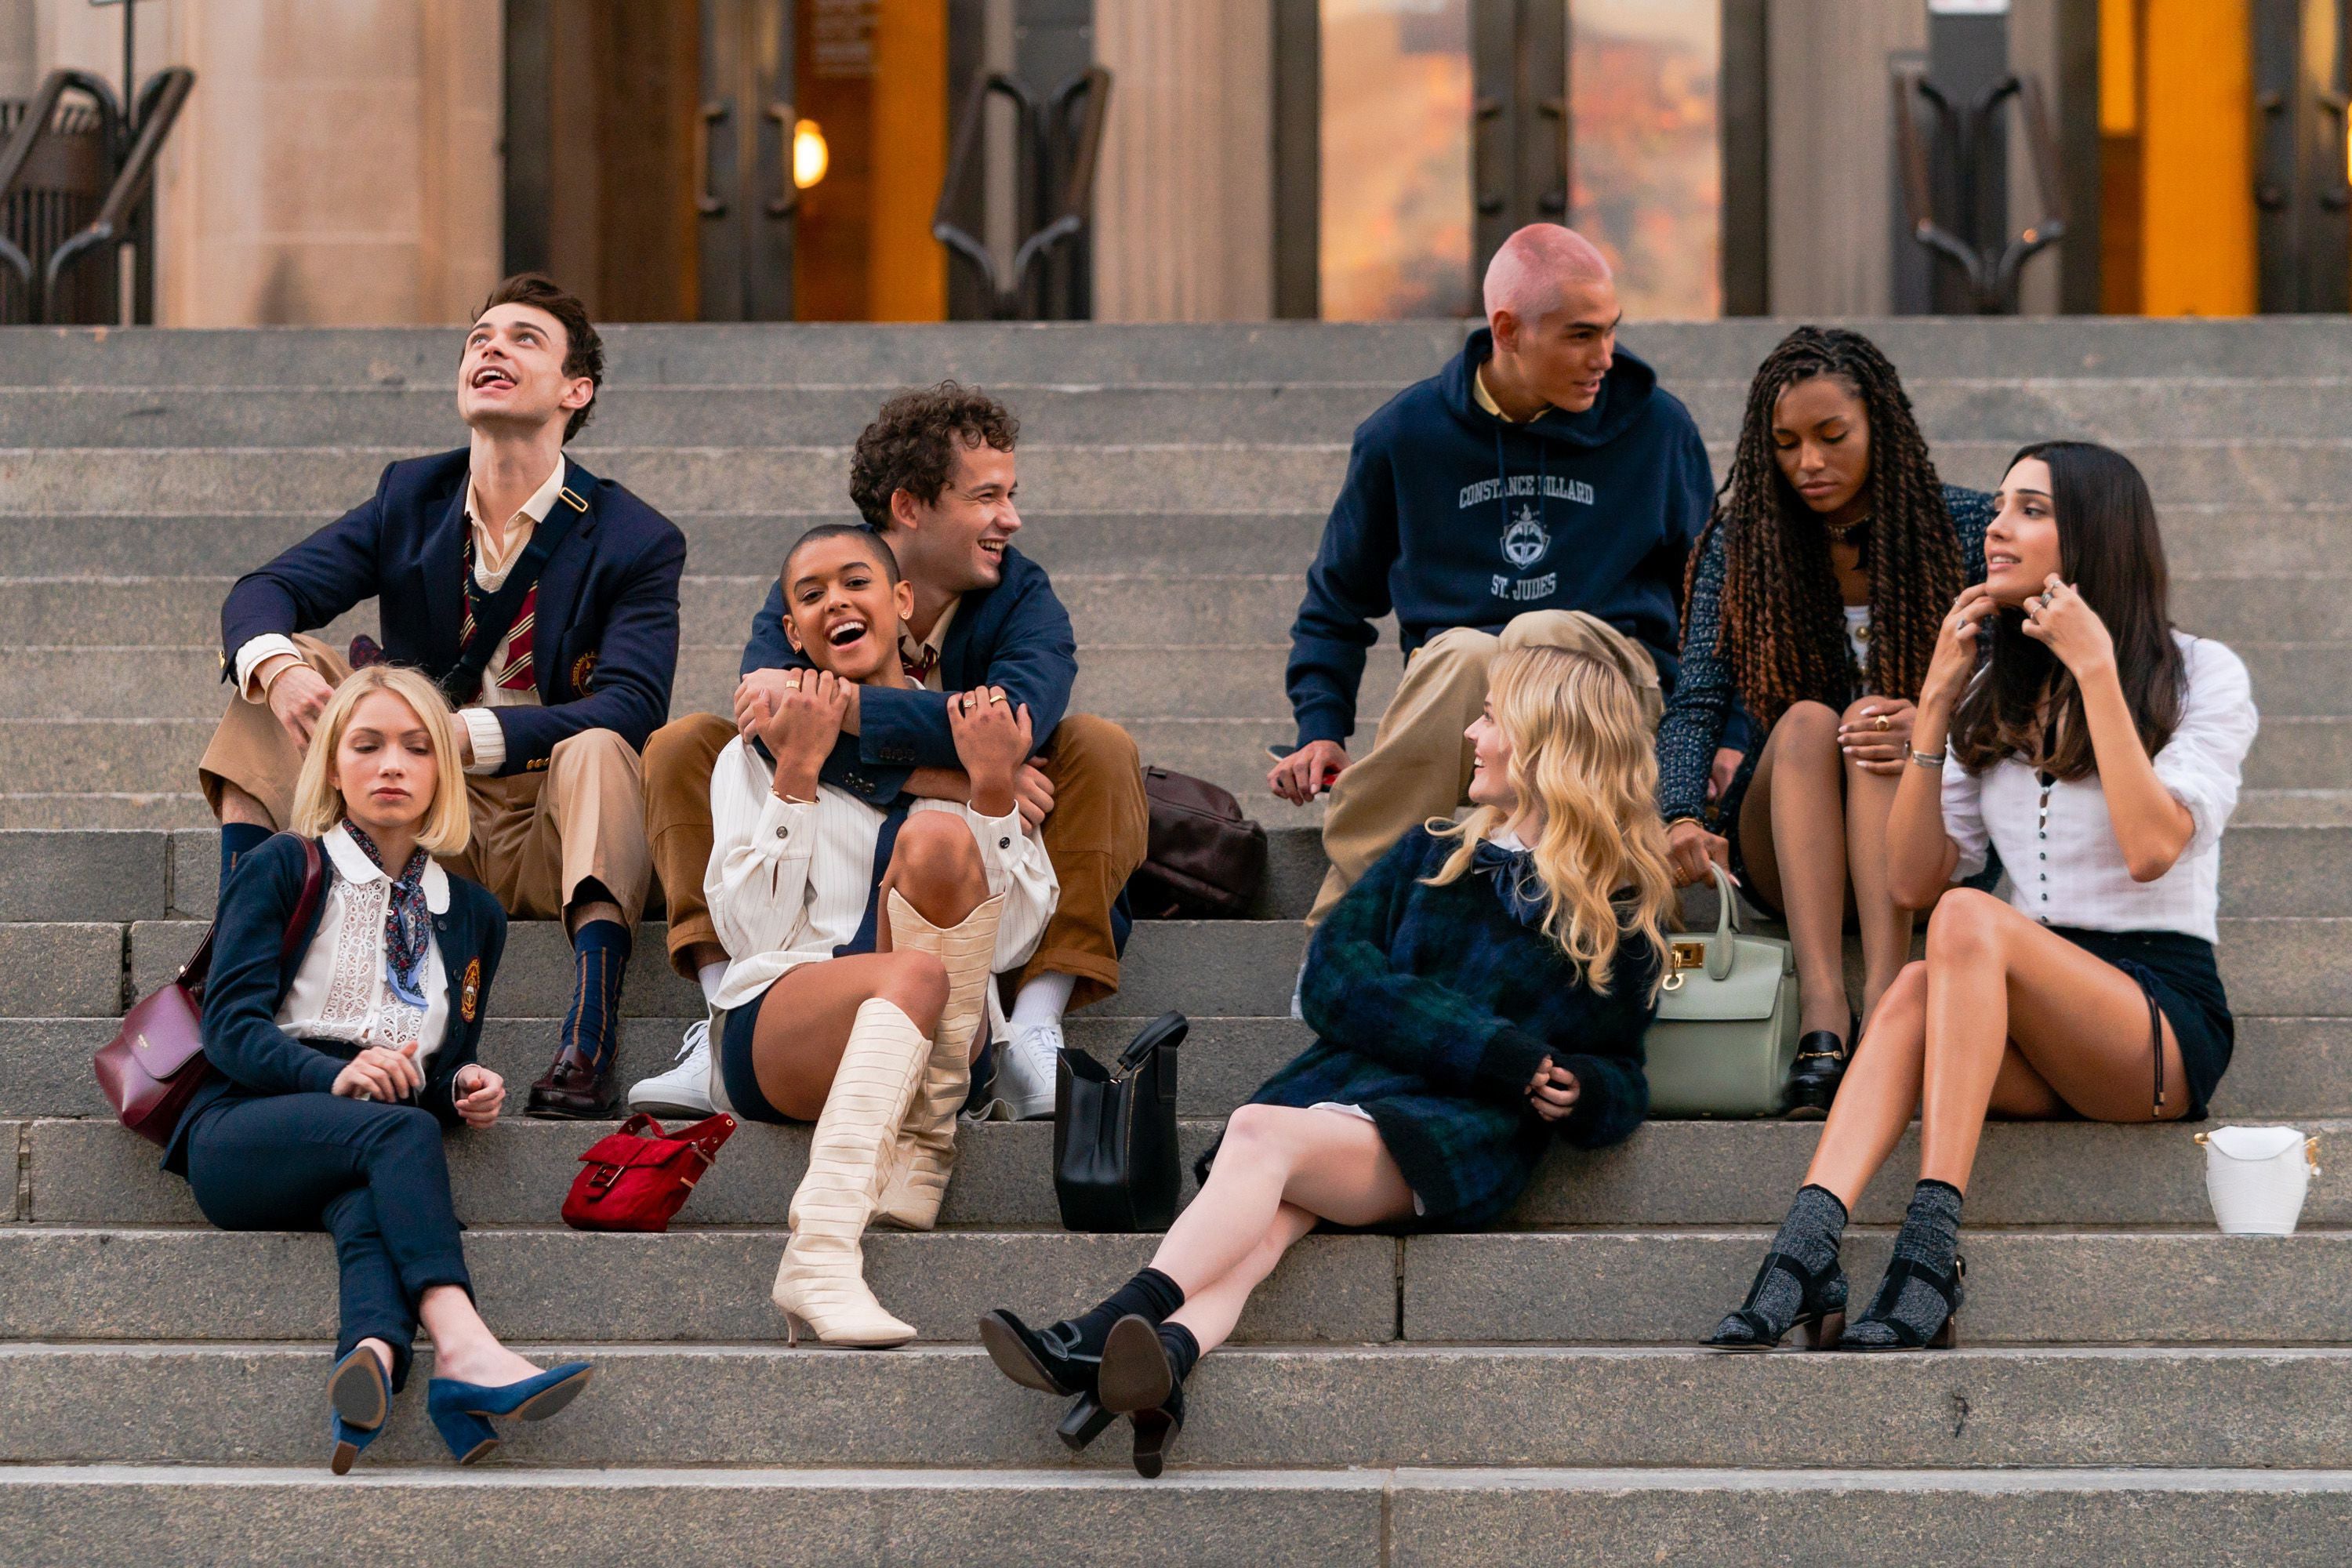 Every Photo from the 'Gossip Girl' Reboot So Far